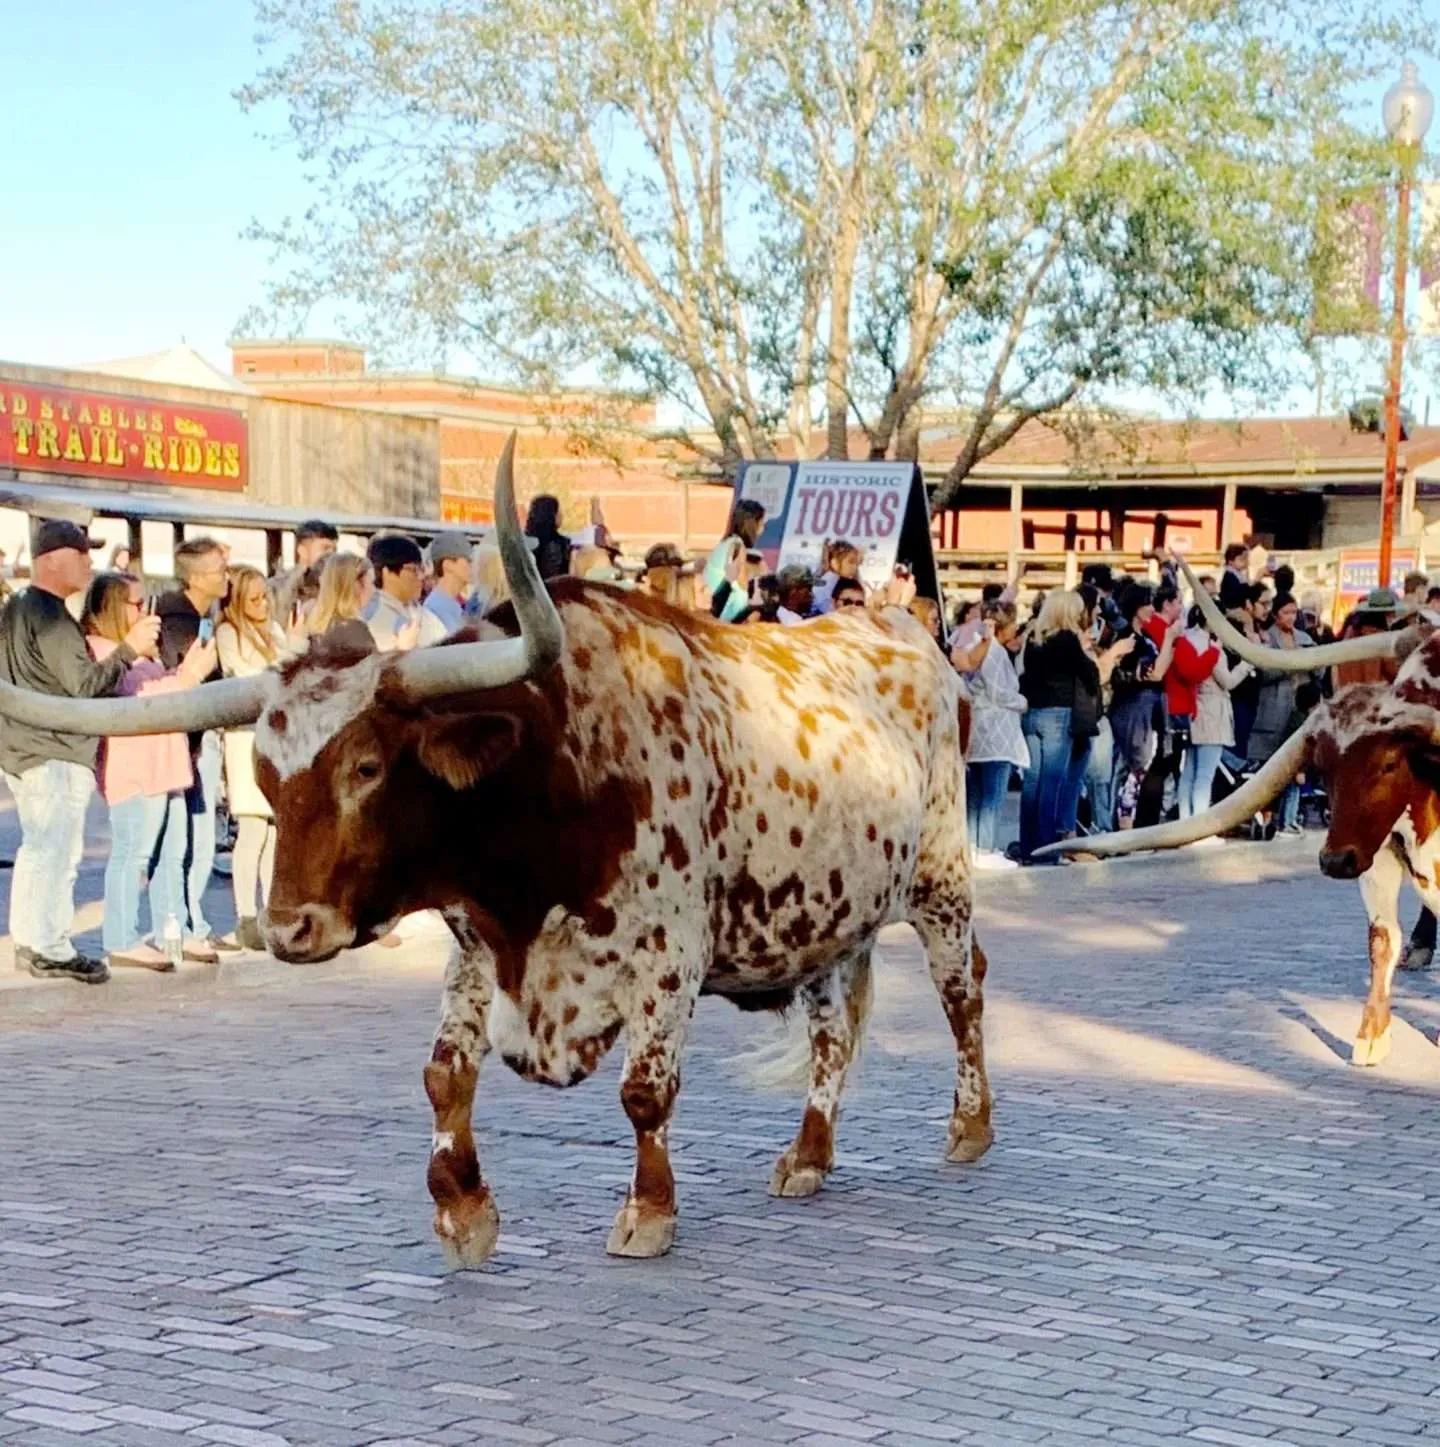 Longhorn at the Fort Worth Stockyards cattle drive.